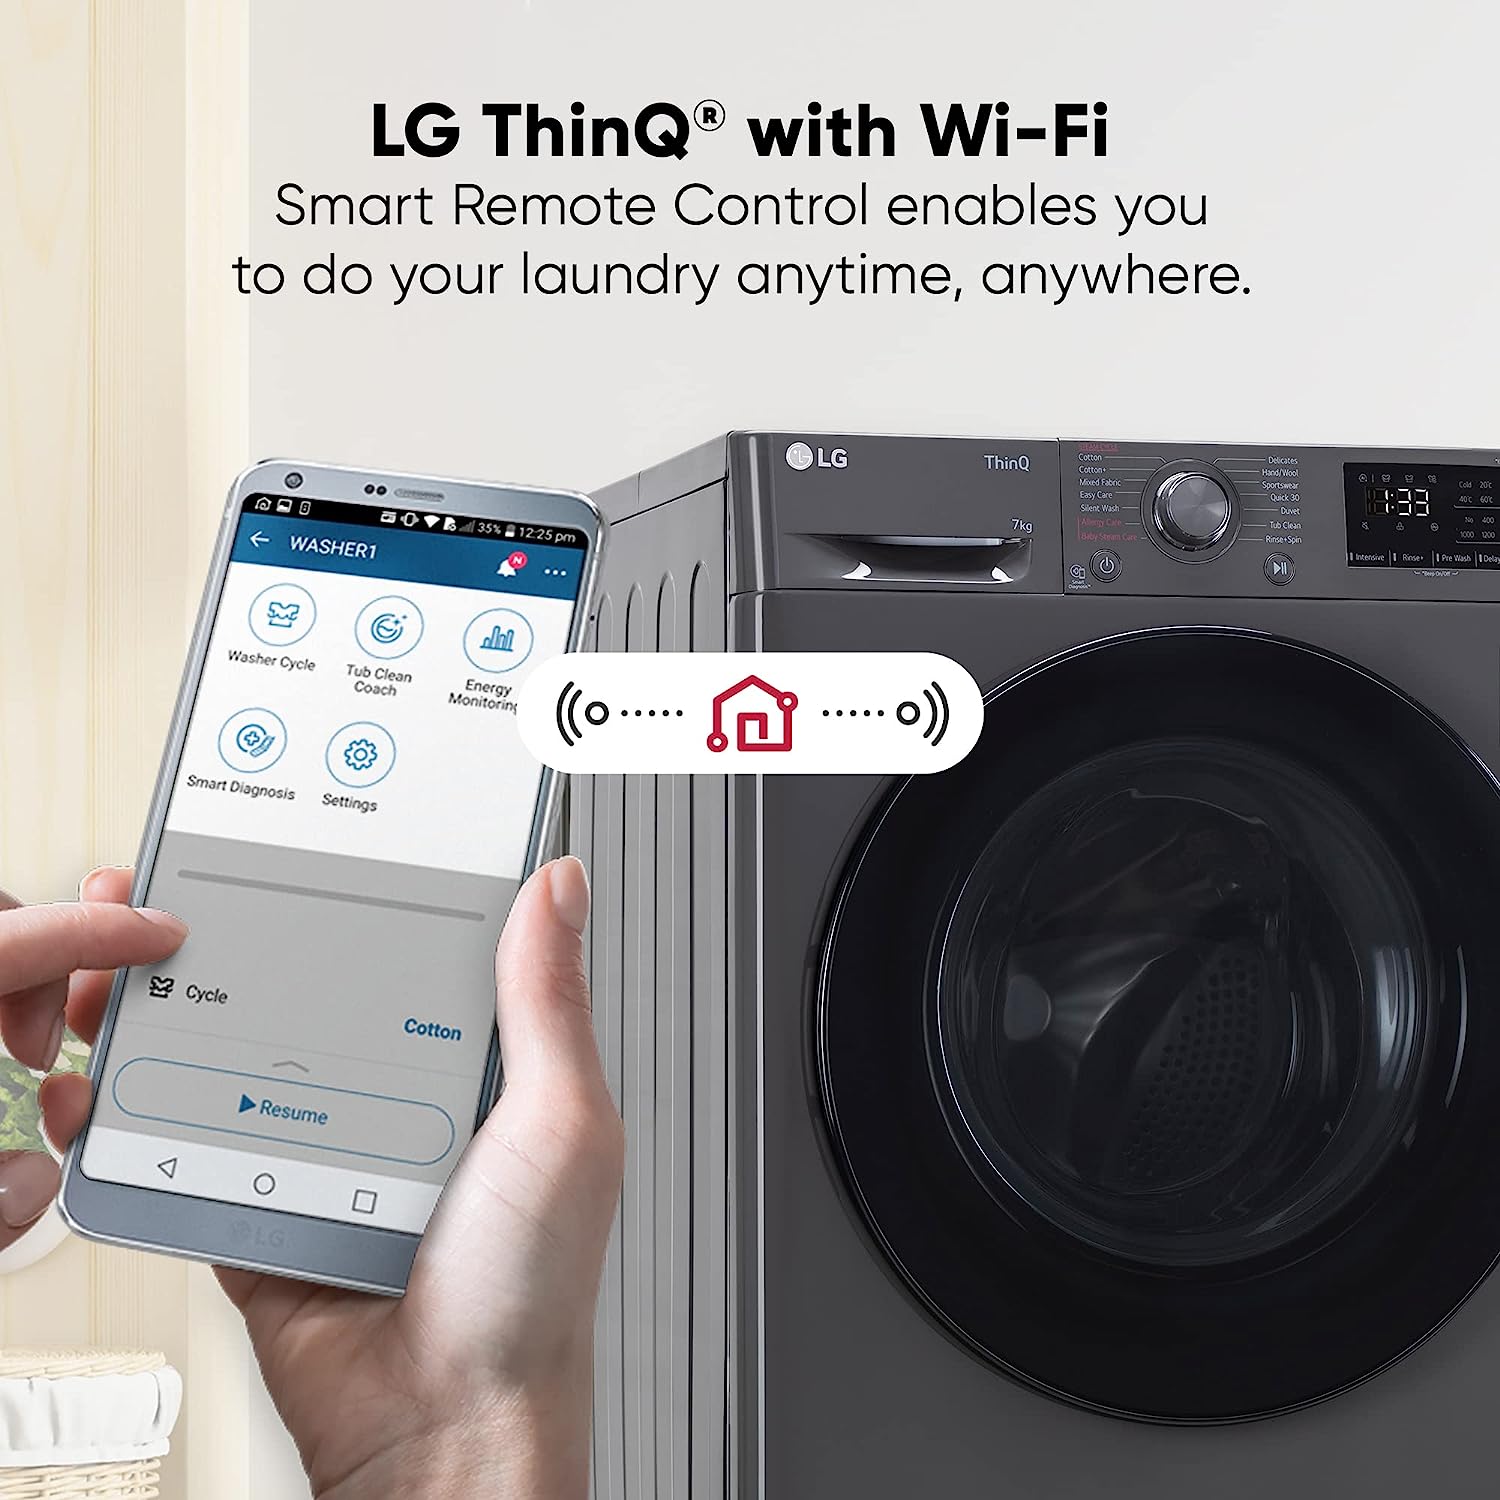 LG FHV1207Z4M 7 Kg 5 Star Inverter Wi-Fi Fully-Automatic Front Load Washing Machine with In-Built Heater (Middle Black)